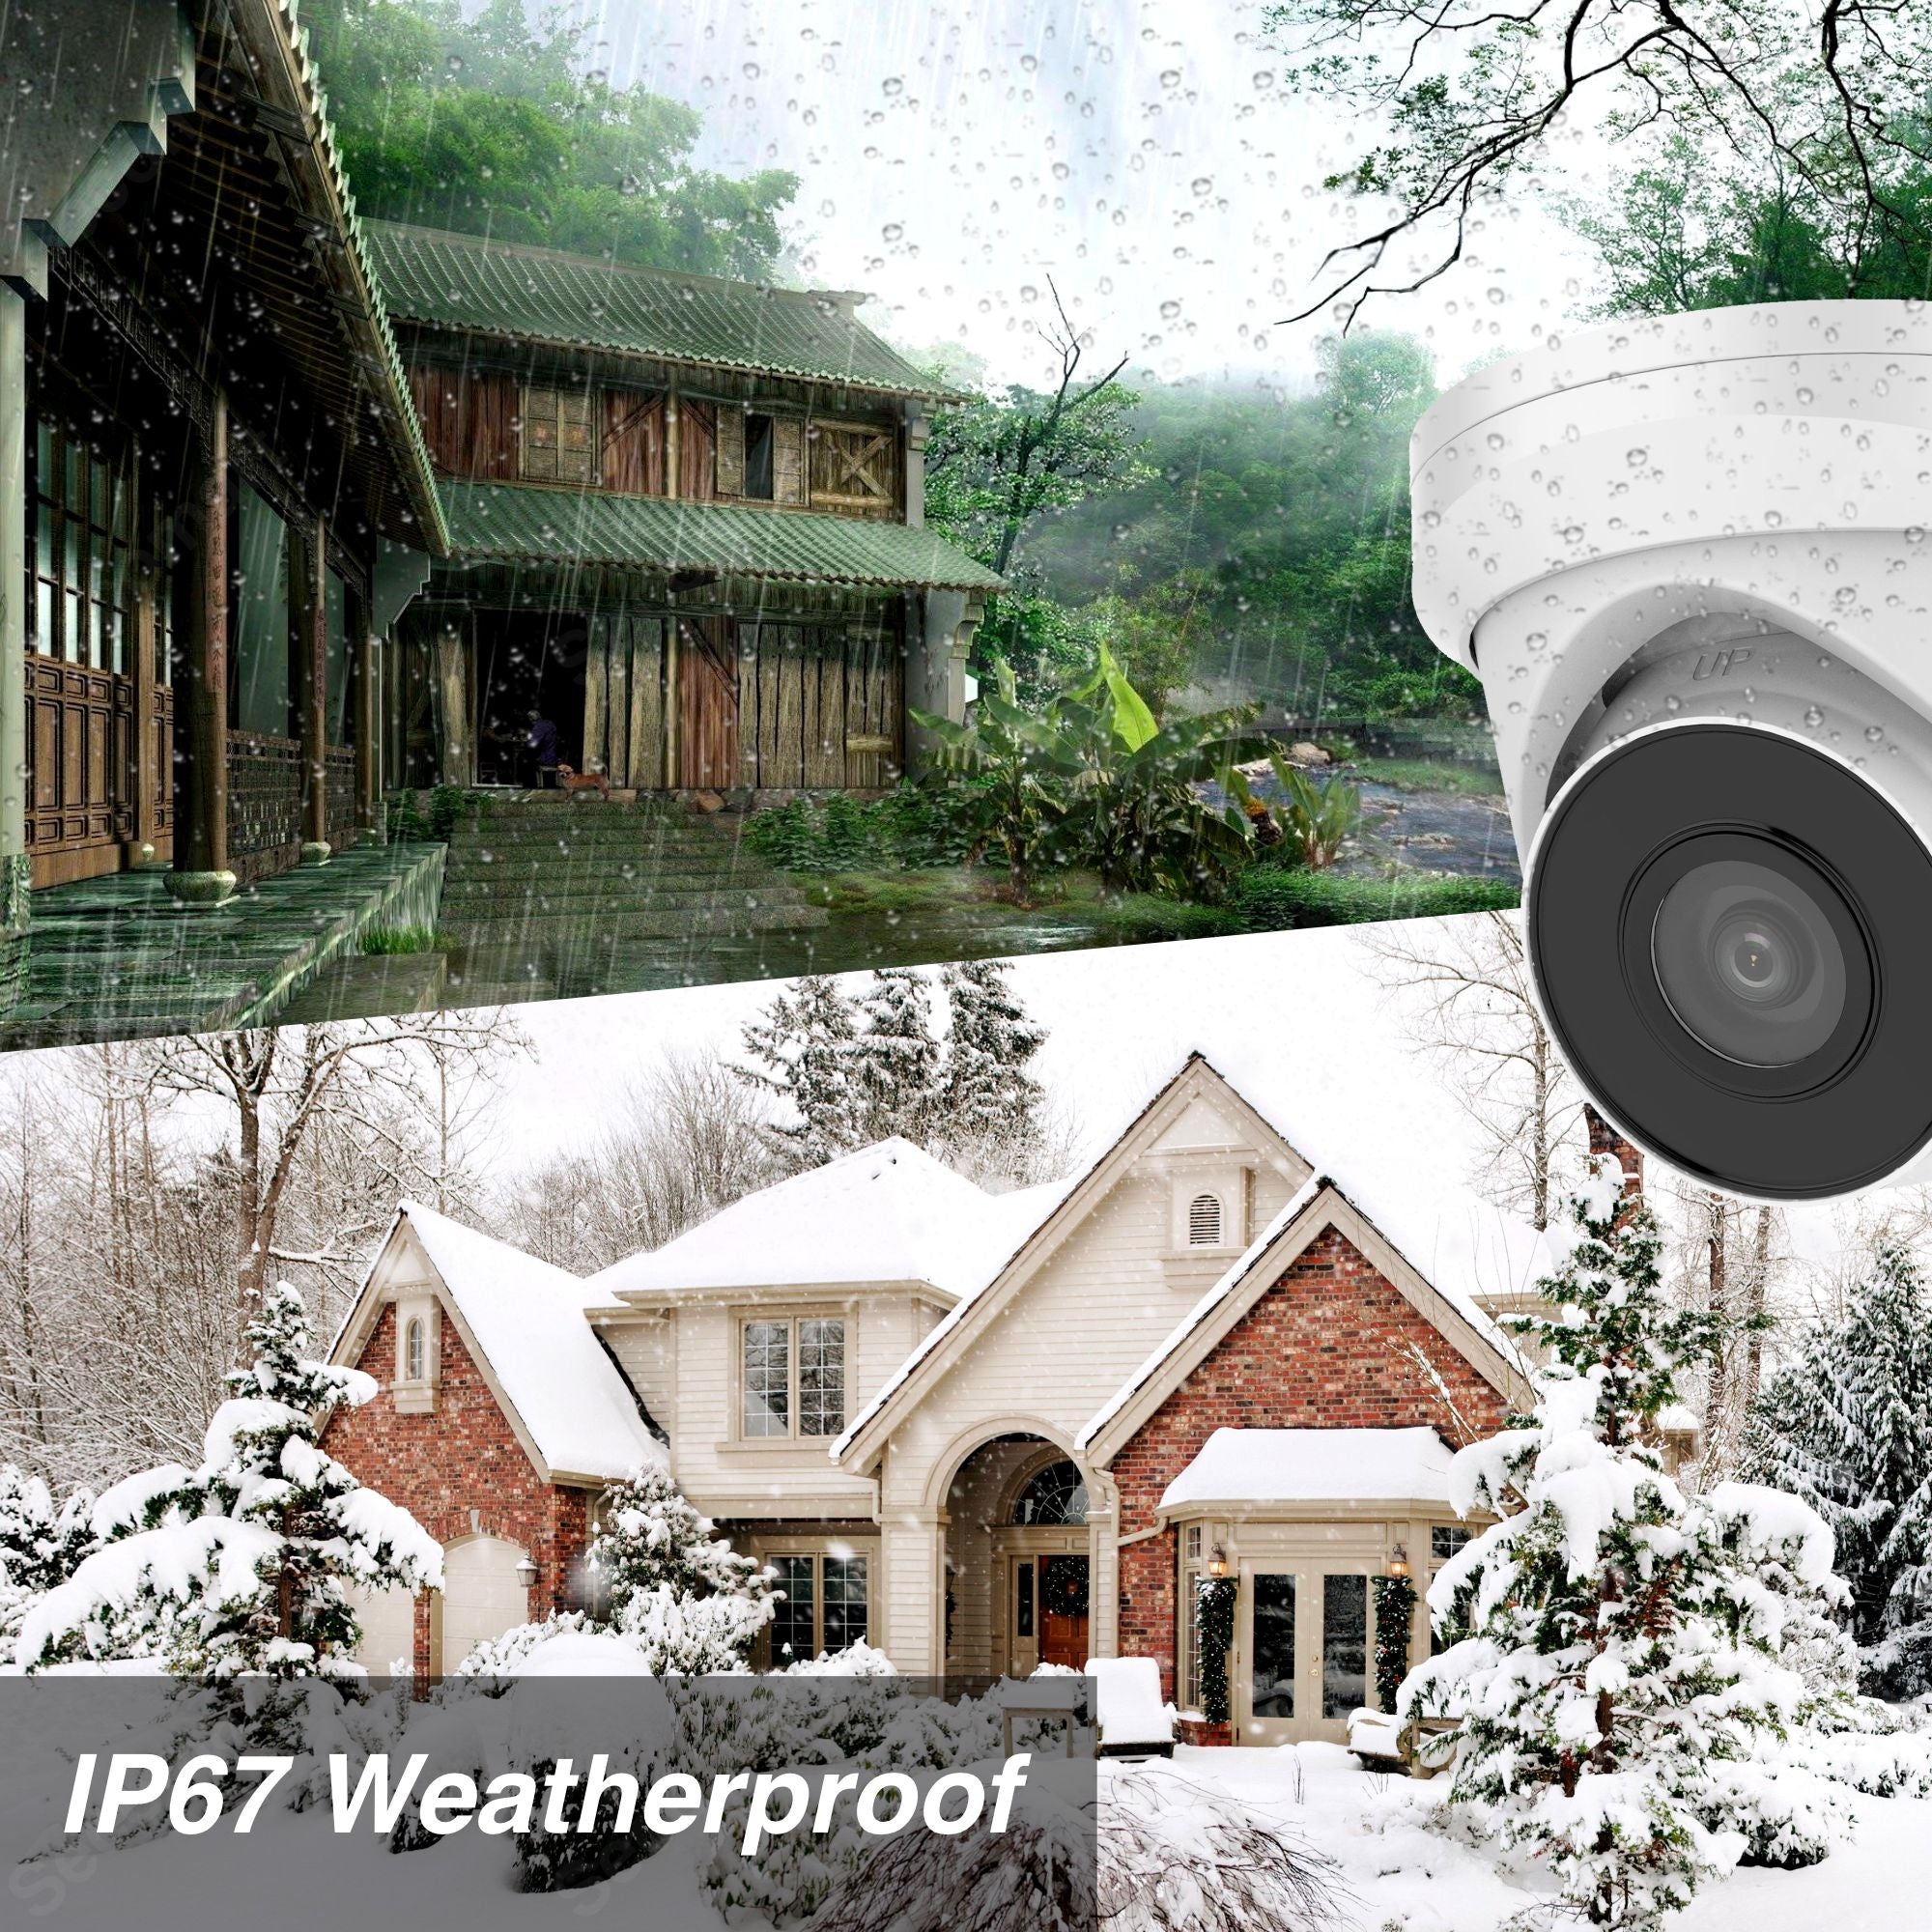 Hilook 4K Security Camera System, 6-Camera PoE NVR Surveillance Kit Outdoor 2TB DIY Wired Turret, Hilook by Hikvision